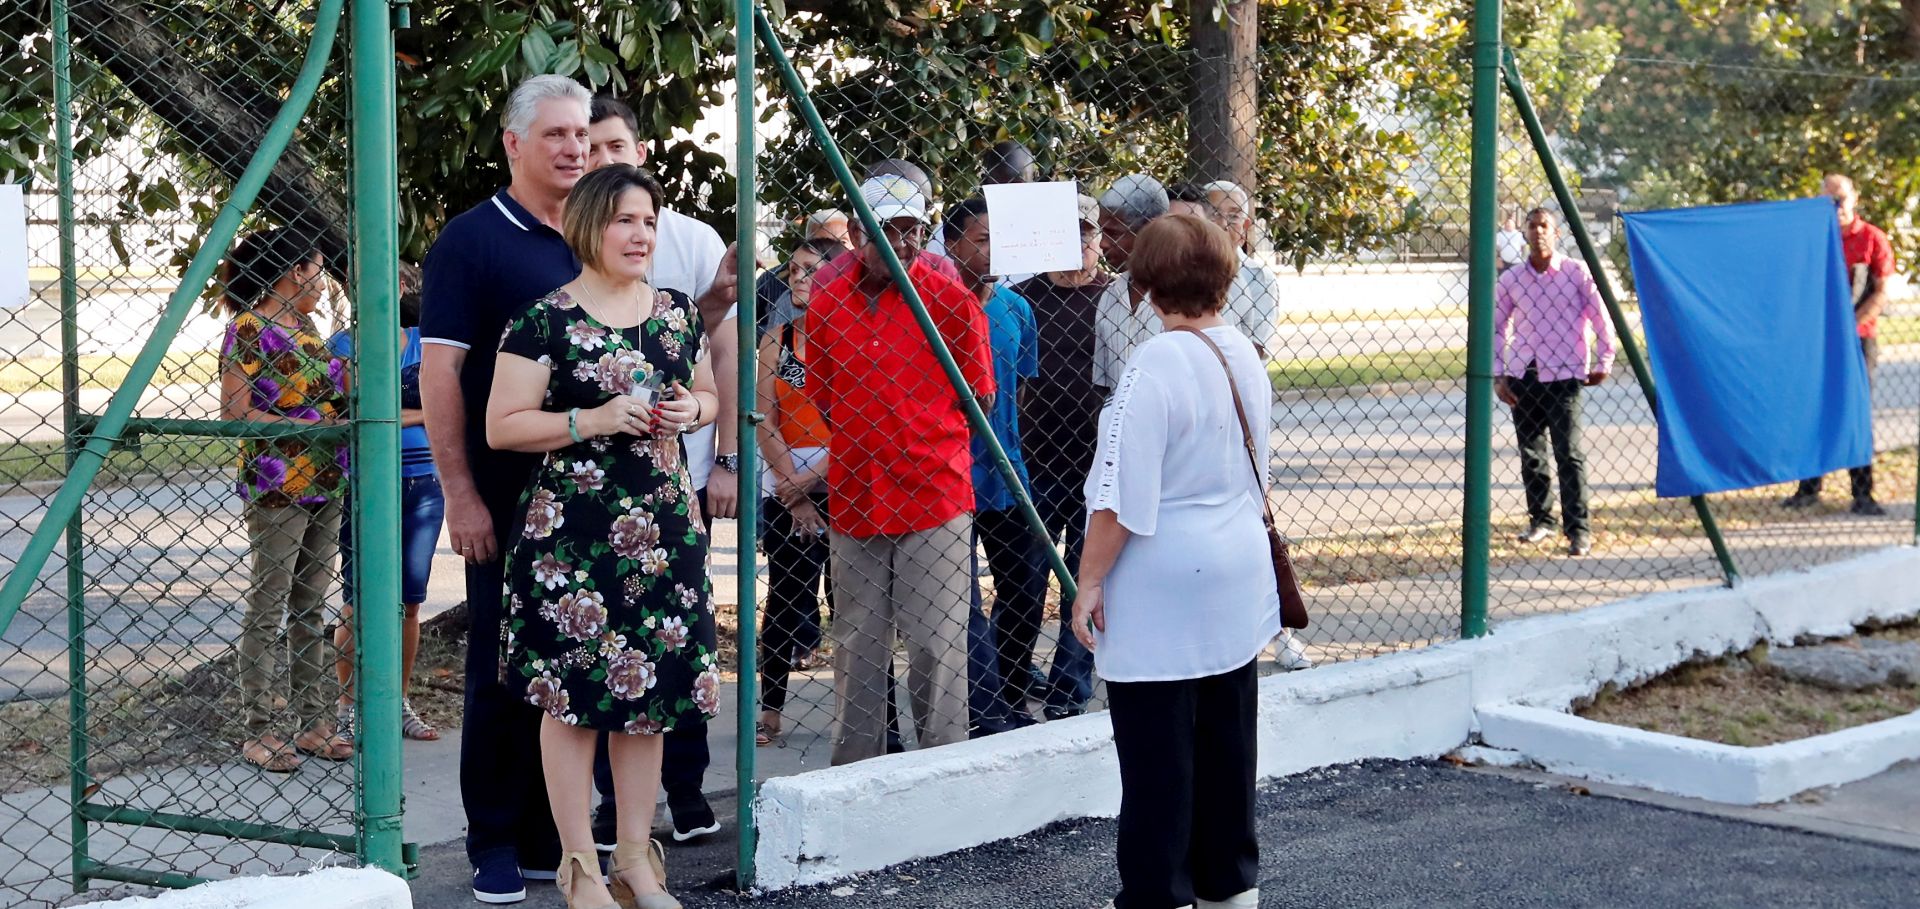 epa07393028 Cuban President Miguel Diaz-Canel (L), accompanied by his wife Liz Cuesta Peraza (C), lines up at the entrance of an electoral college to vote in the referendum on the new Constitution, in Havana, Cuba, 24 February 2019. More than 25,000 polling stations opened their doors this Sunday in Cuba to vote in the referendum on the new Constitution - which ratifies communism and as a novelty recognizes private property - and to which more than eight million citizens are summoned.  EPA/ERNESTO MASTRASCUSA